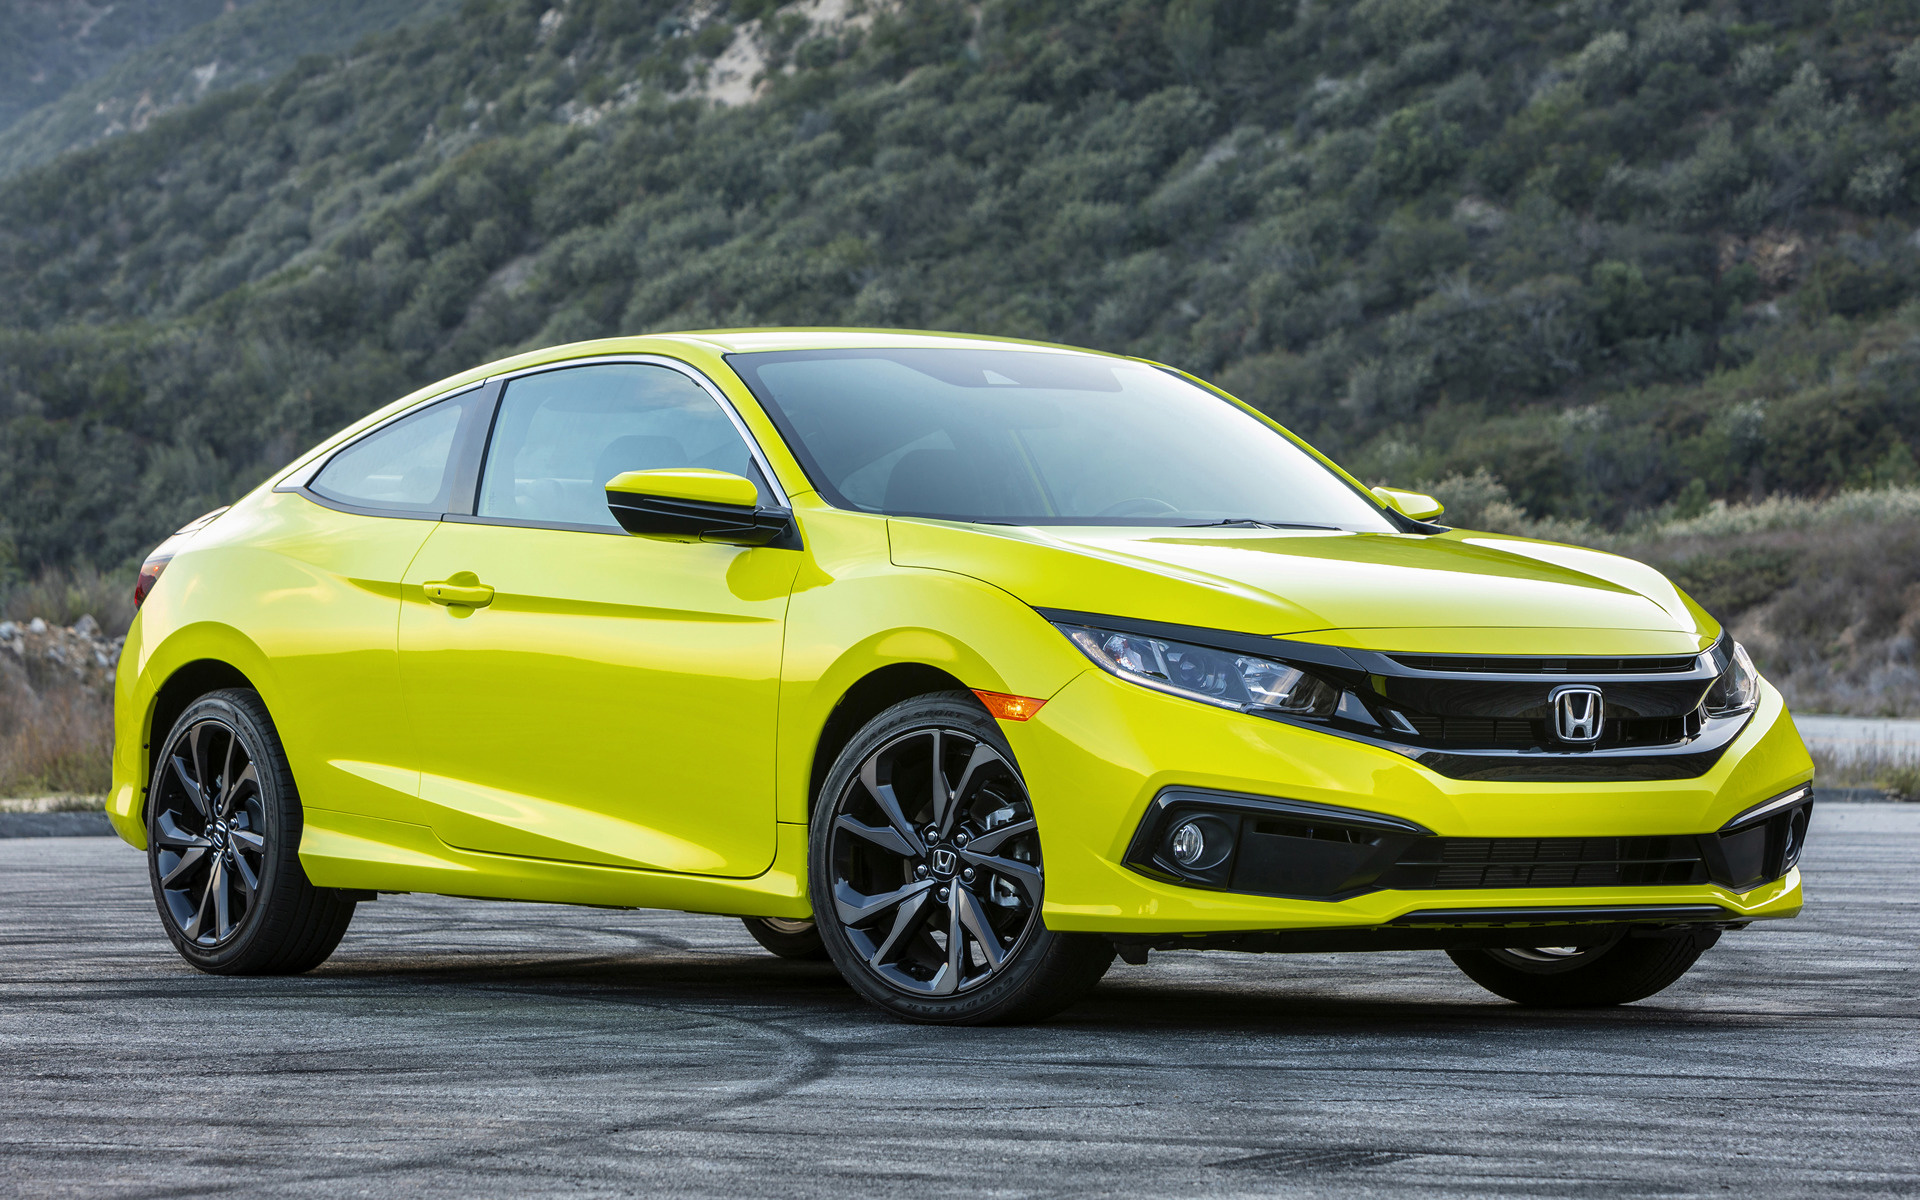 2022 Honda Civic Coupe US Wallpapers and HD Images 